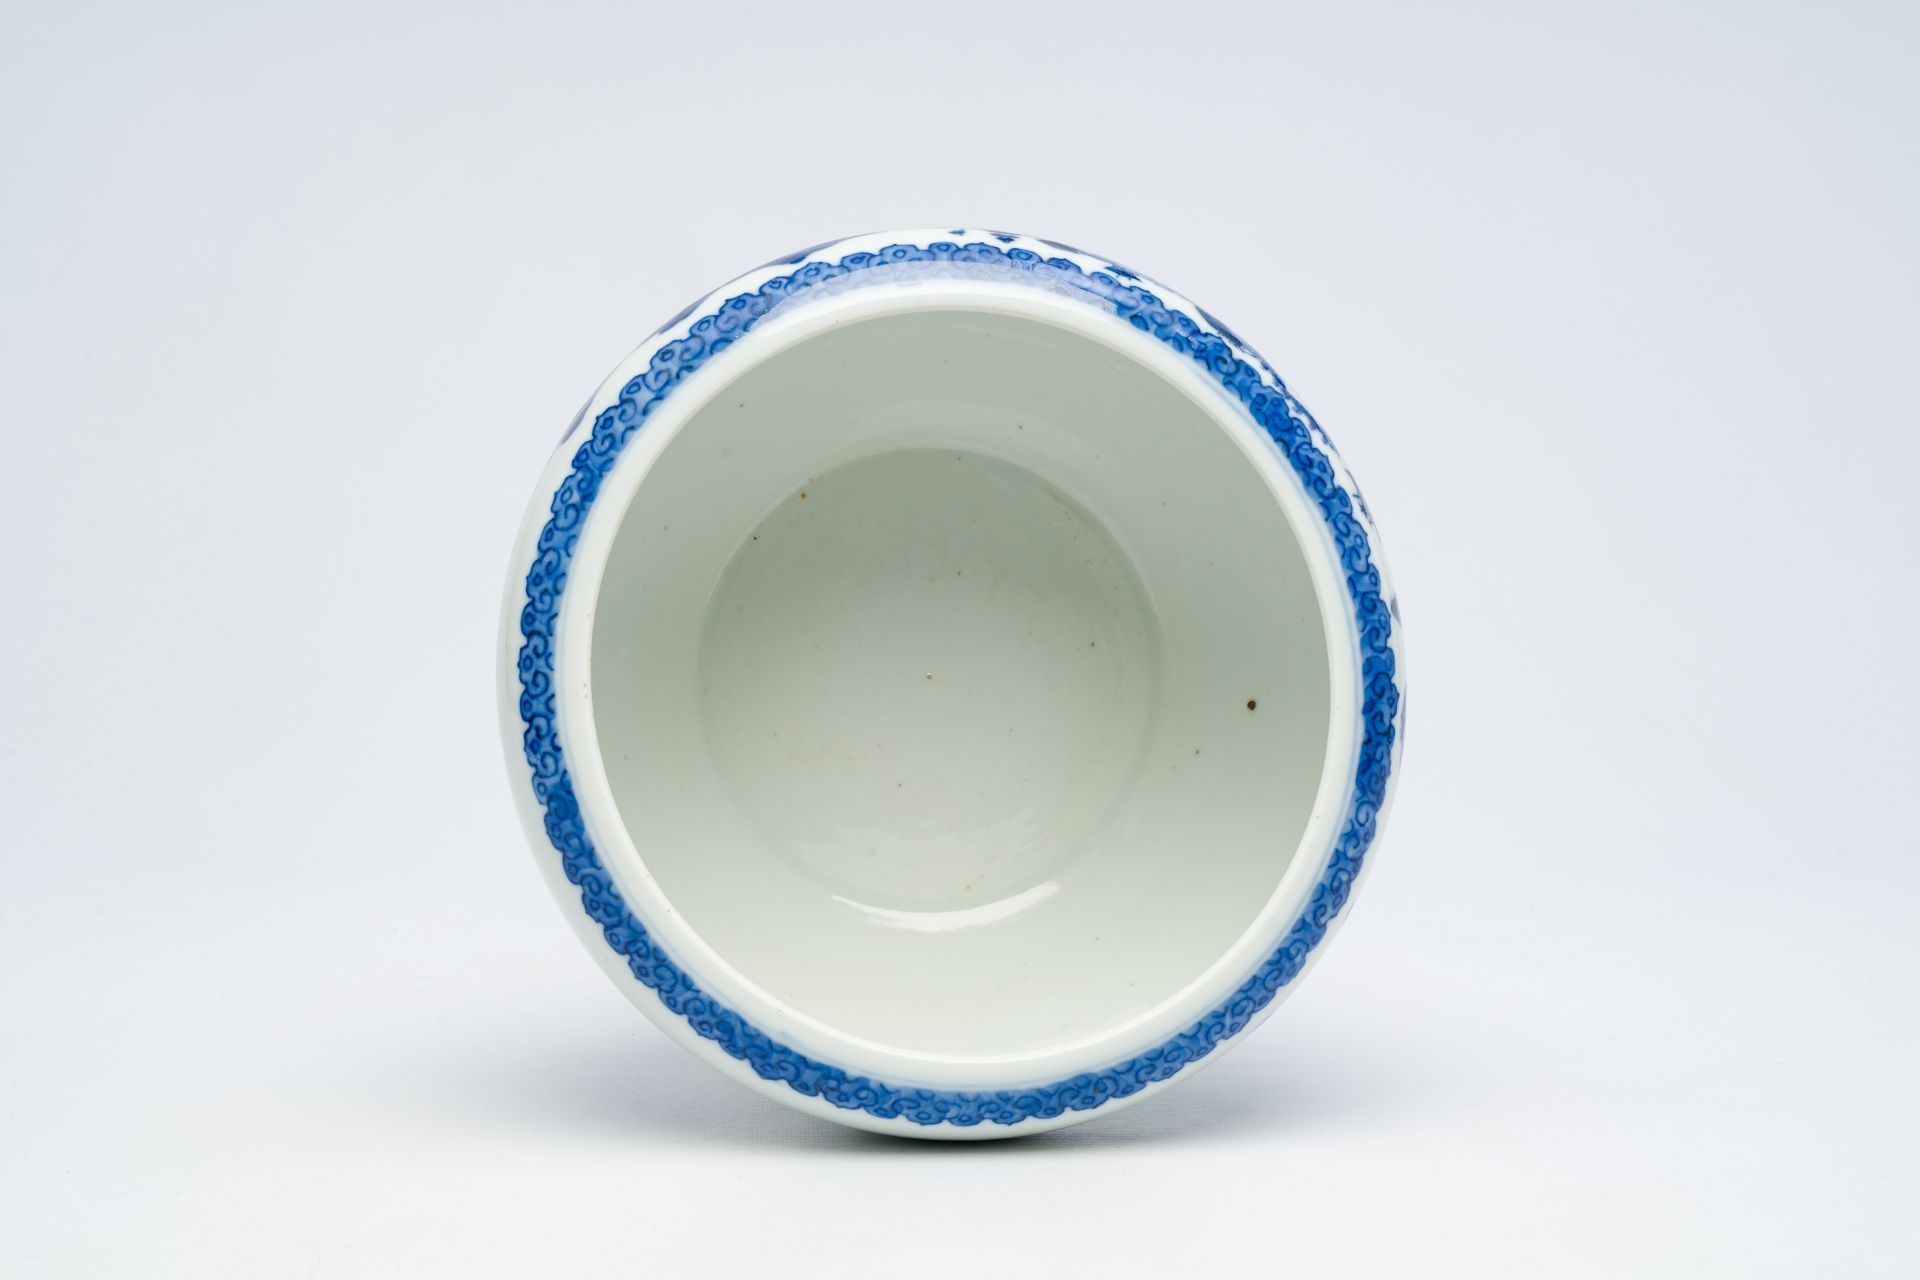 A varied collection of Chinese blue and white porcelain, 19th/20th C. - Image 28 of 30